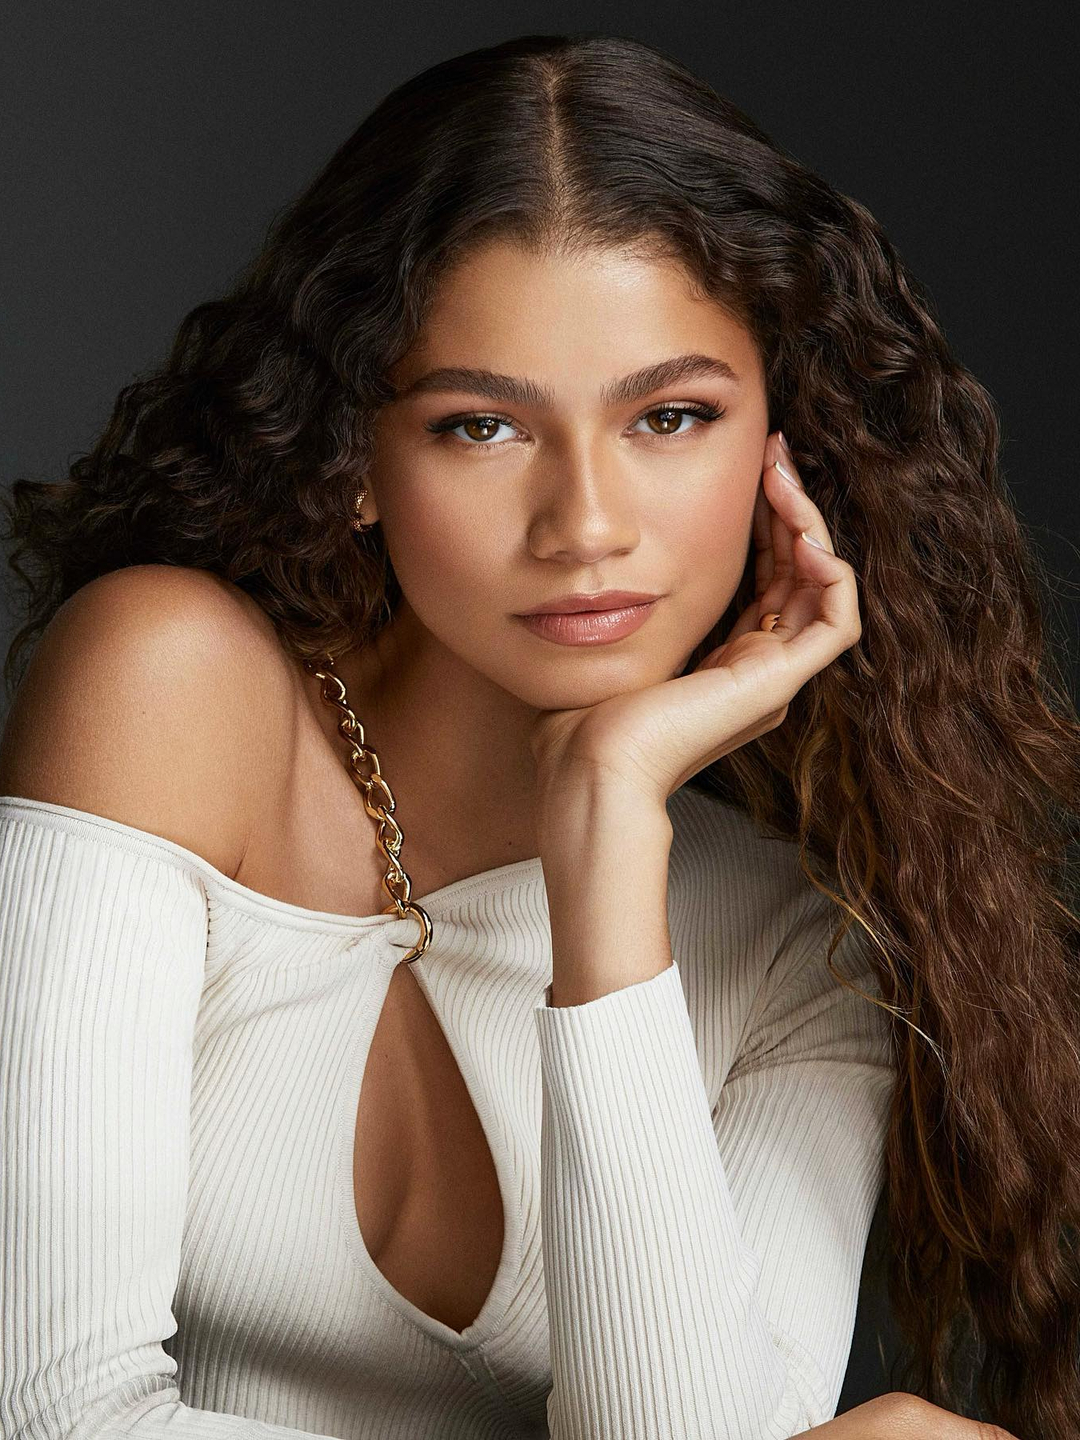 Zendaya how did she became famous